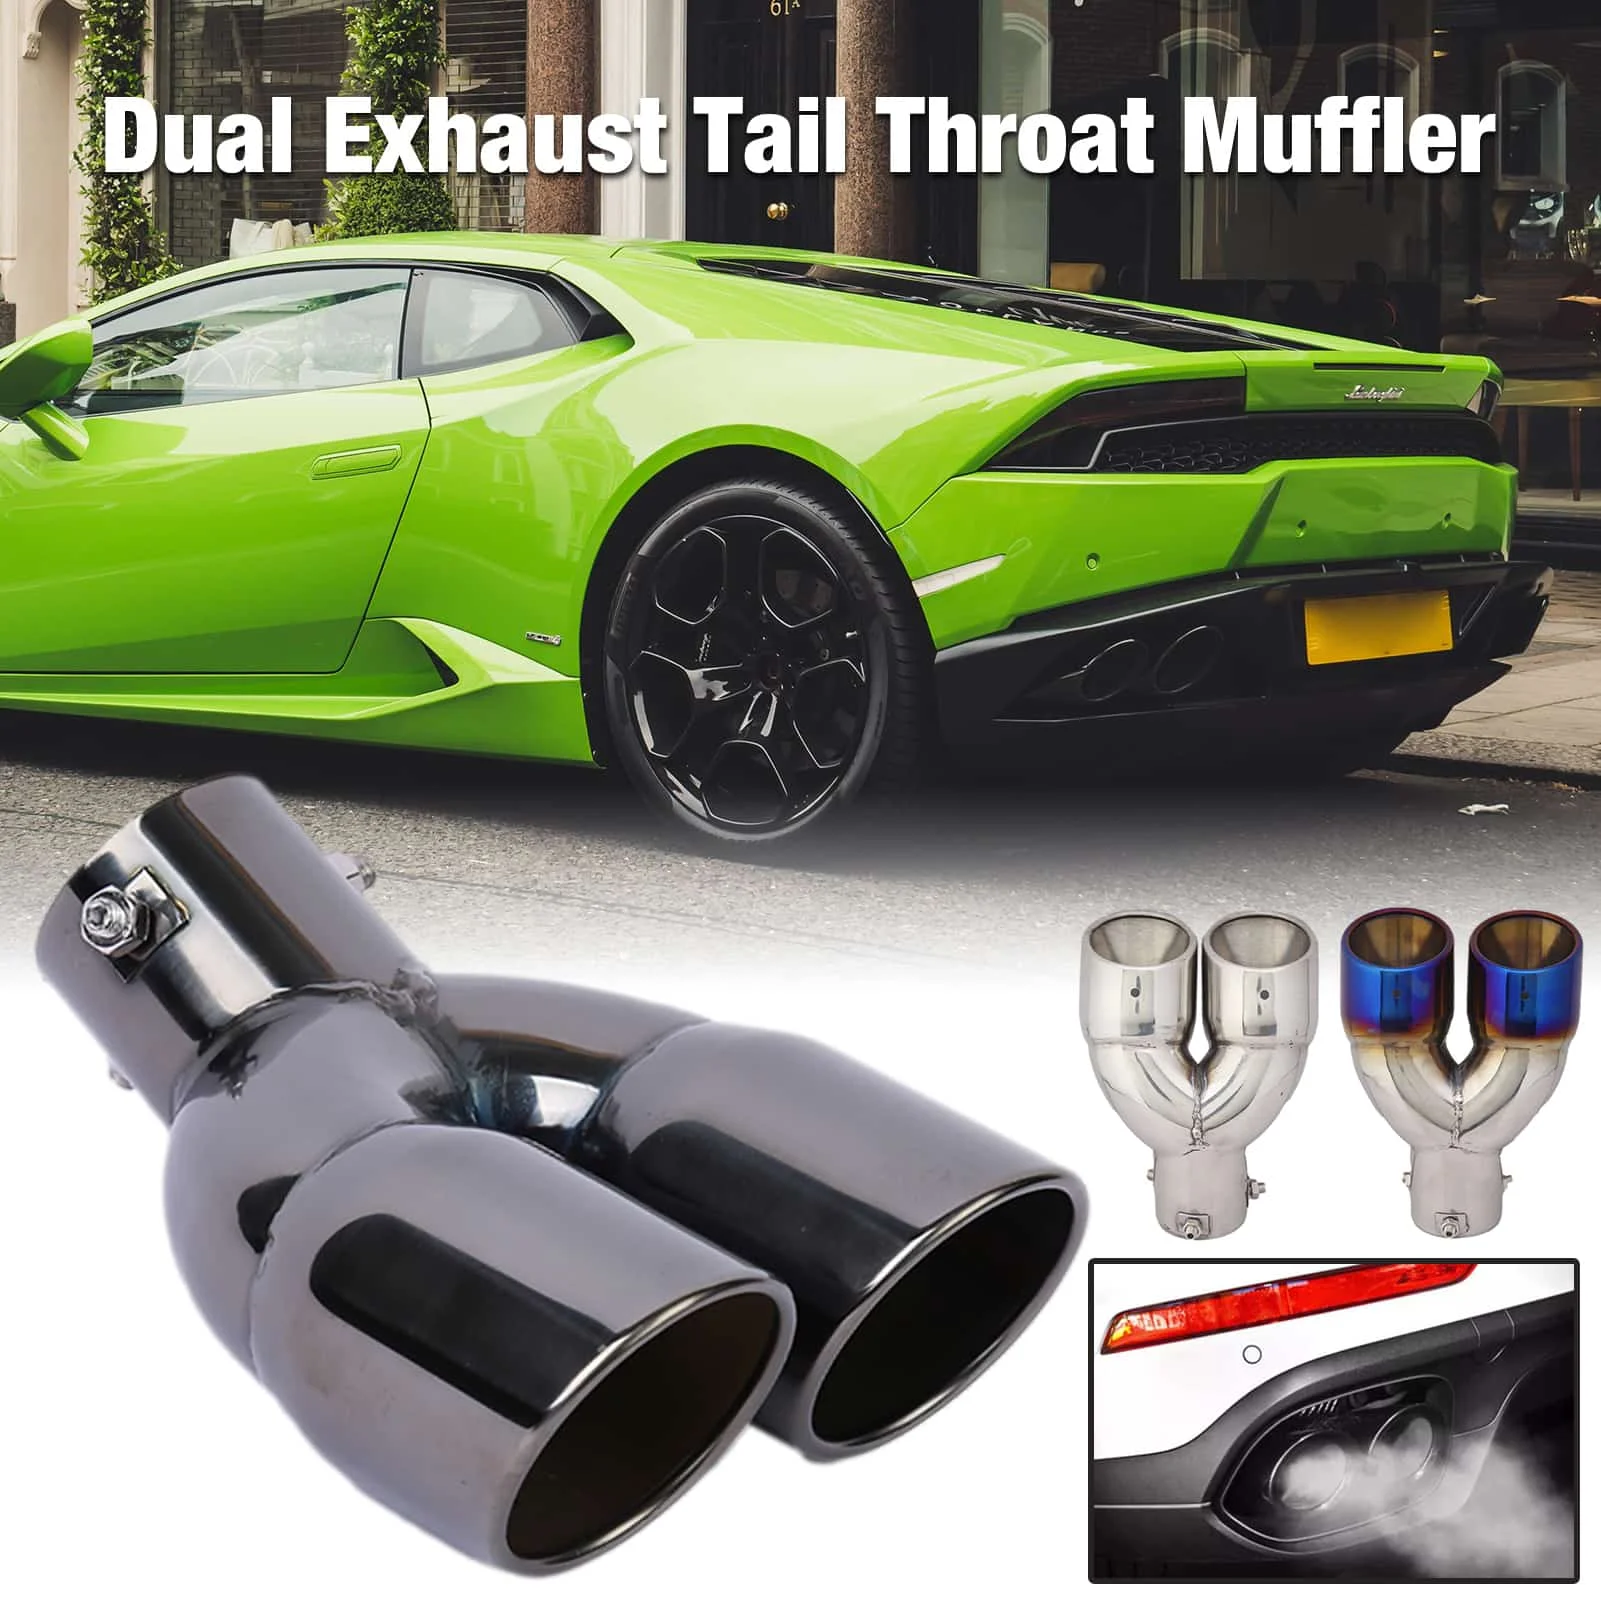 

63mm Double Outlet Stainless Steel Chrome Car Muffler Exhaust Pipe Tip End Trim Modified Tail Throat Car Liner Pipe Silver Tools